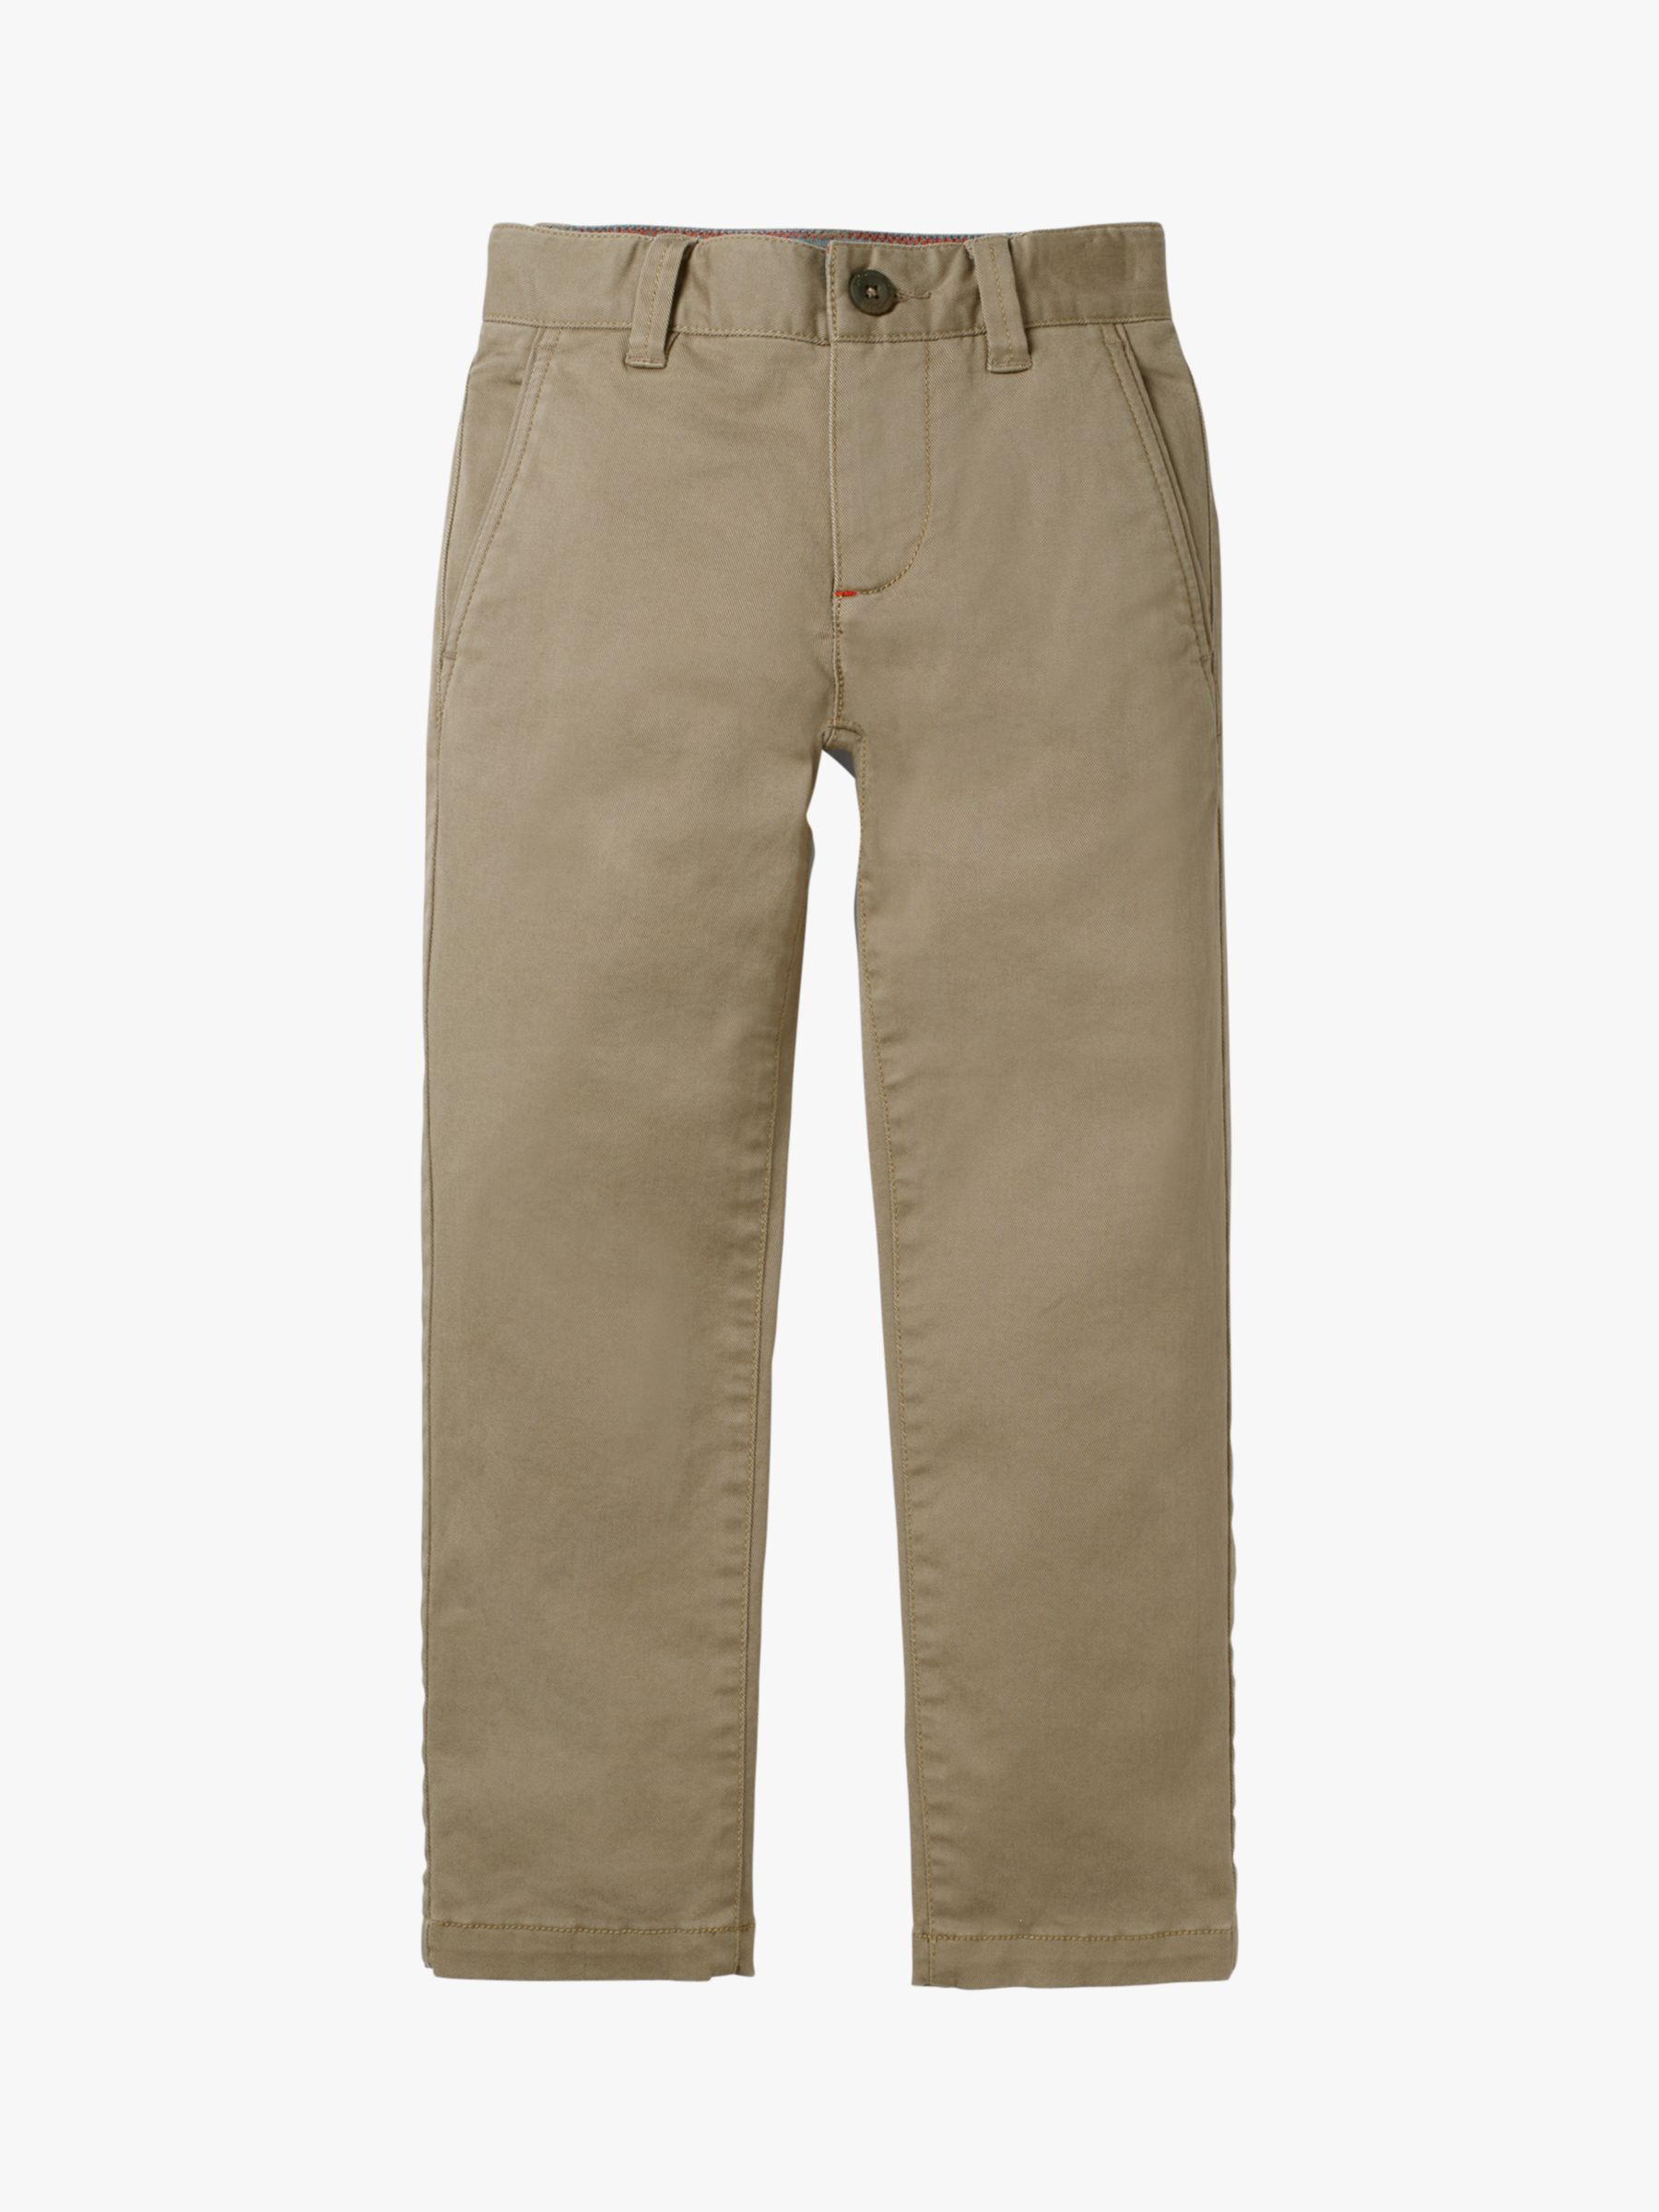 Mini Boden Boys' Chino Trousers, Nutty Brown at John Lewis & Partners